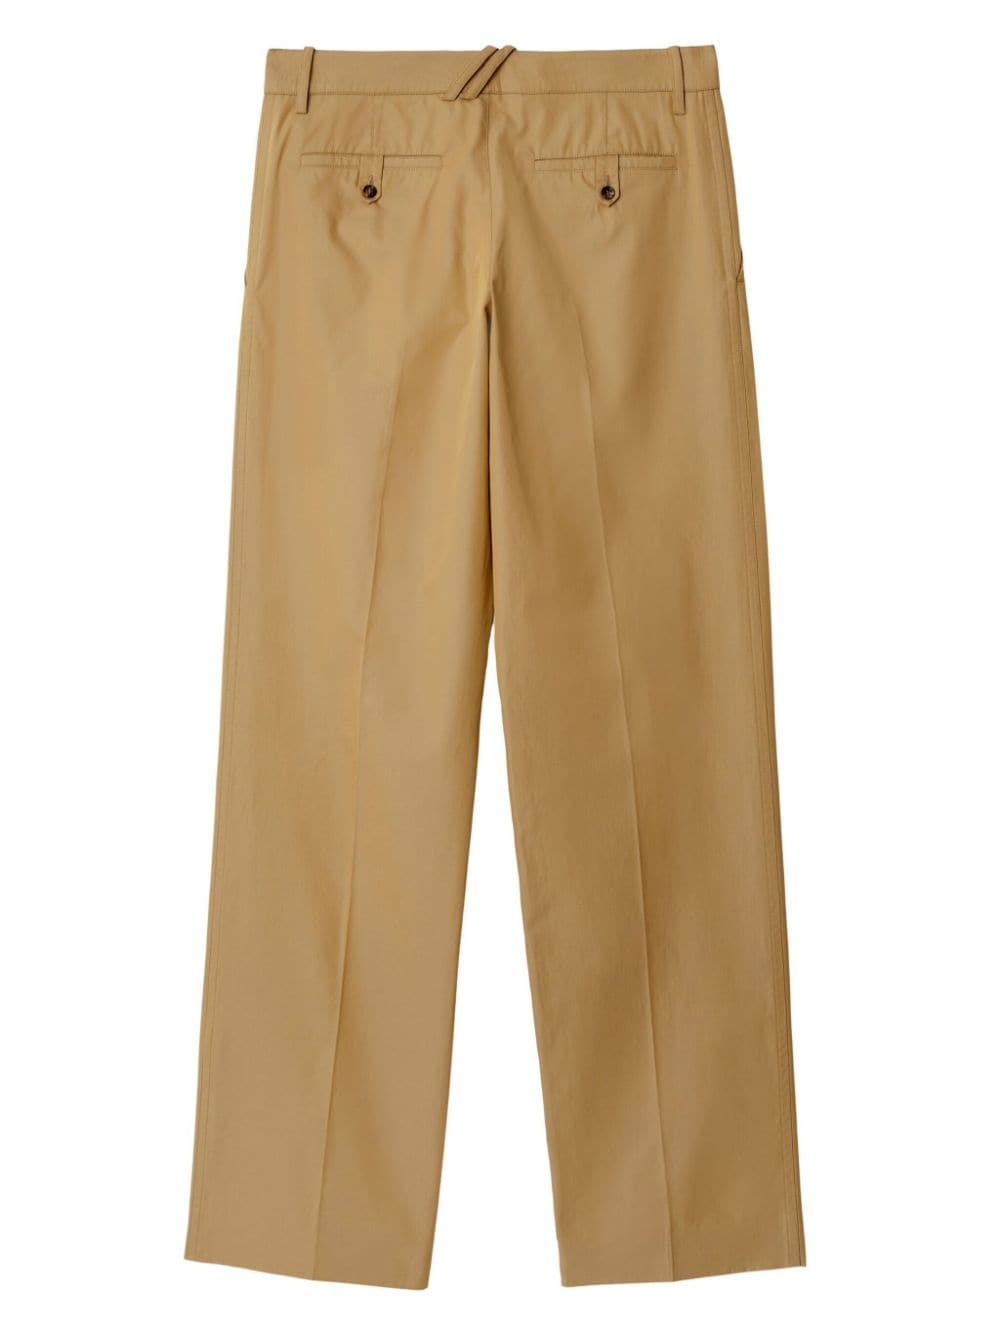 Burberry BURBERRY- Cotton Trousers